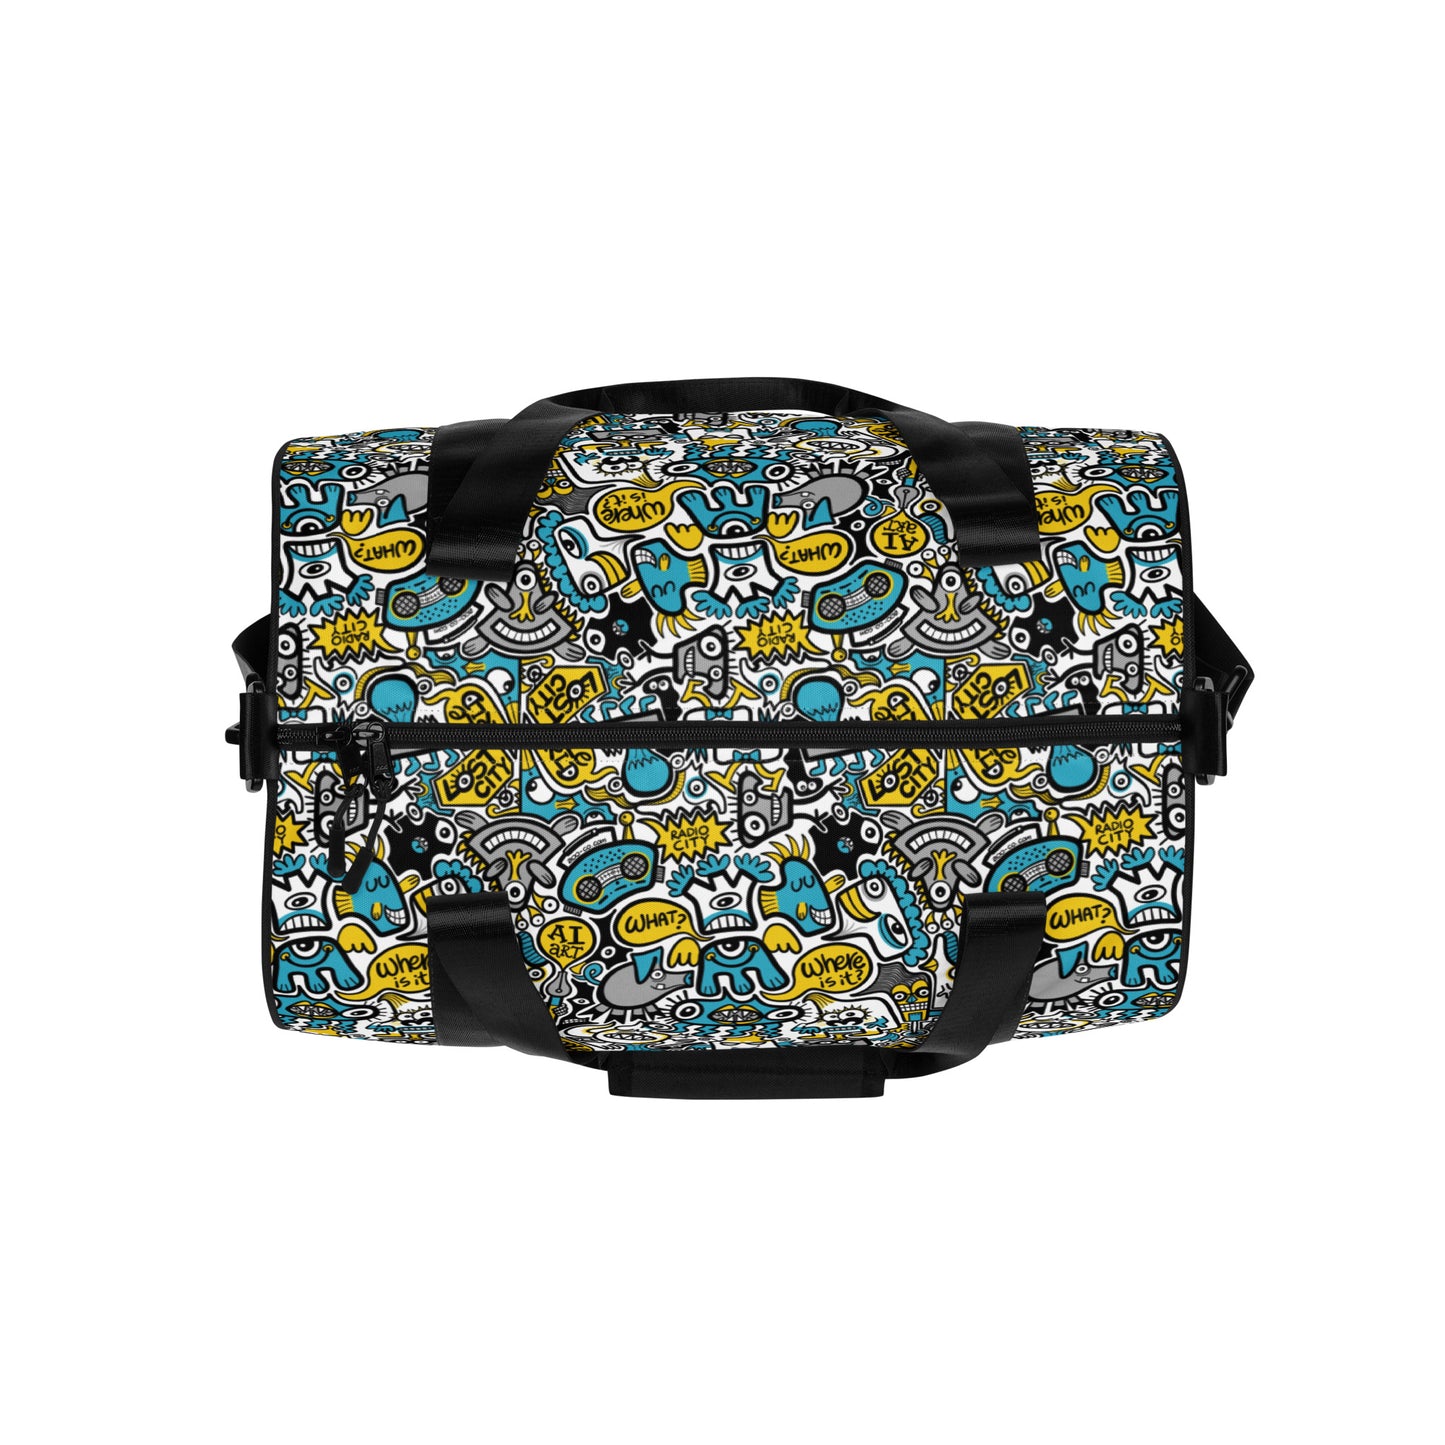 Discover a whole Doodle world buzzing in Lost city All-over print gym bag. Top view